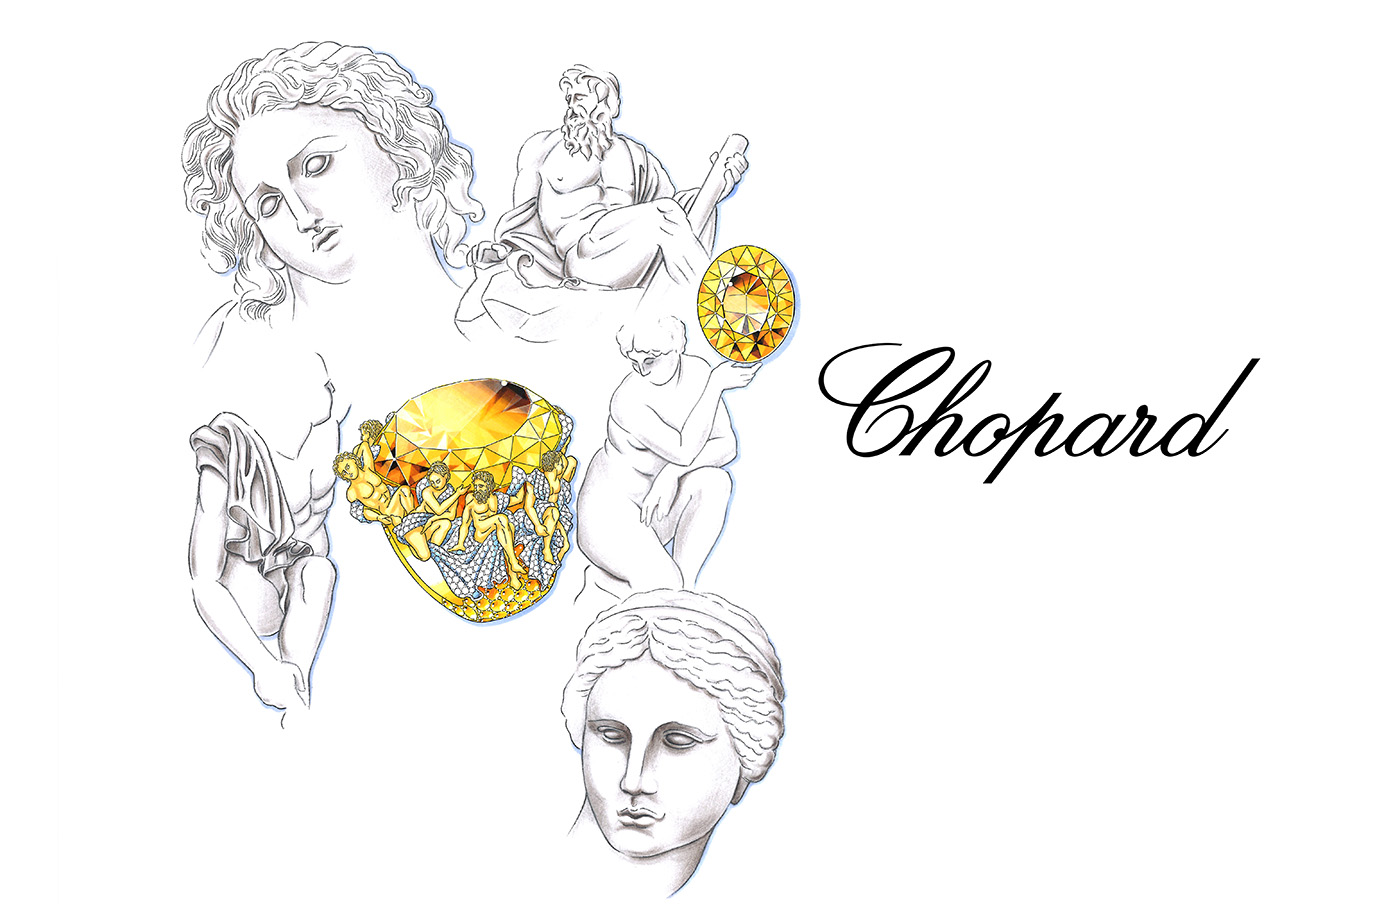 Chopard Exceptional Stones